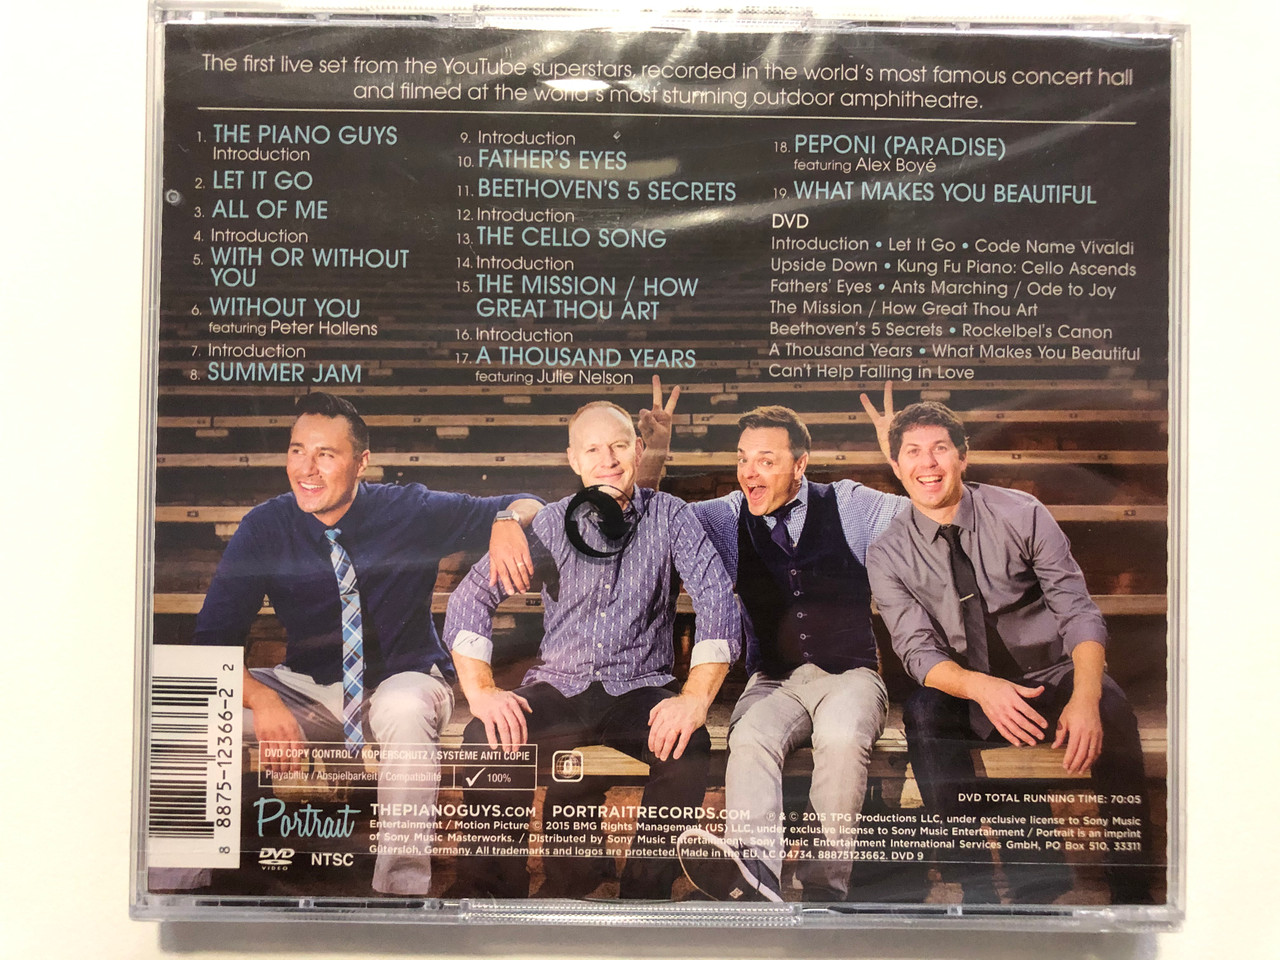 The Piano Guys – Live! / Carnegie Hall Audio + Red Rocks Concert Video /  Deluxe Edition / The First Live CD+DVD set from the YouTube Superstar /  Portrait Audio CD + DVD 2015 / 88875123662 - bibleinmylanguage